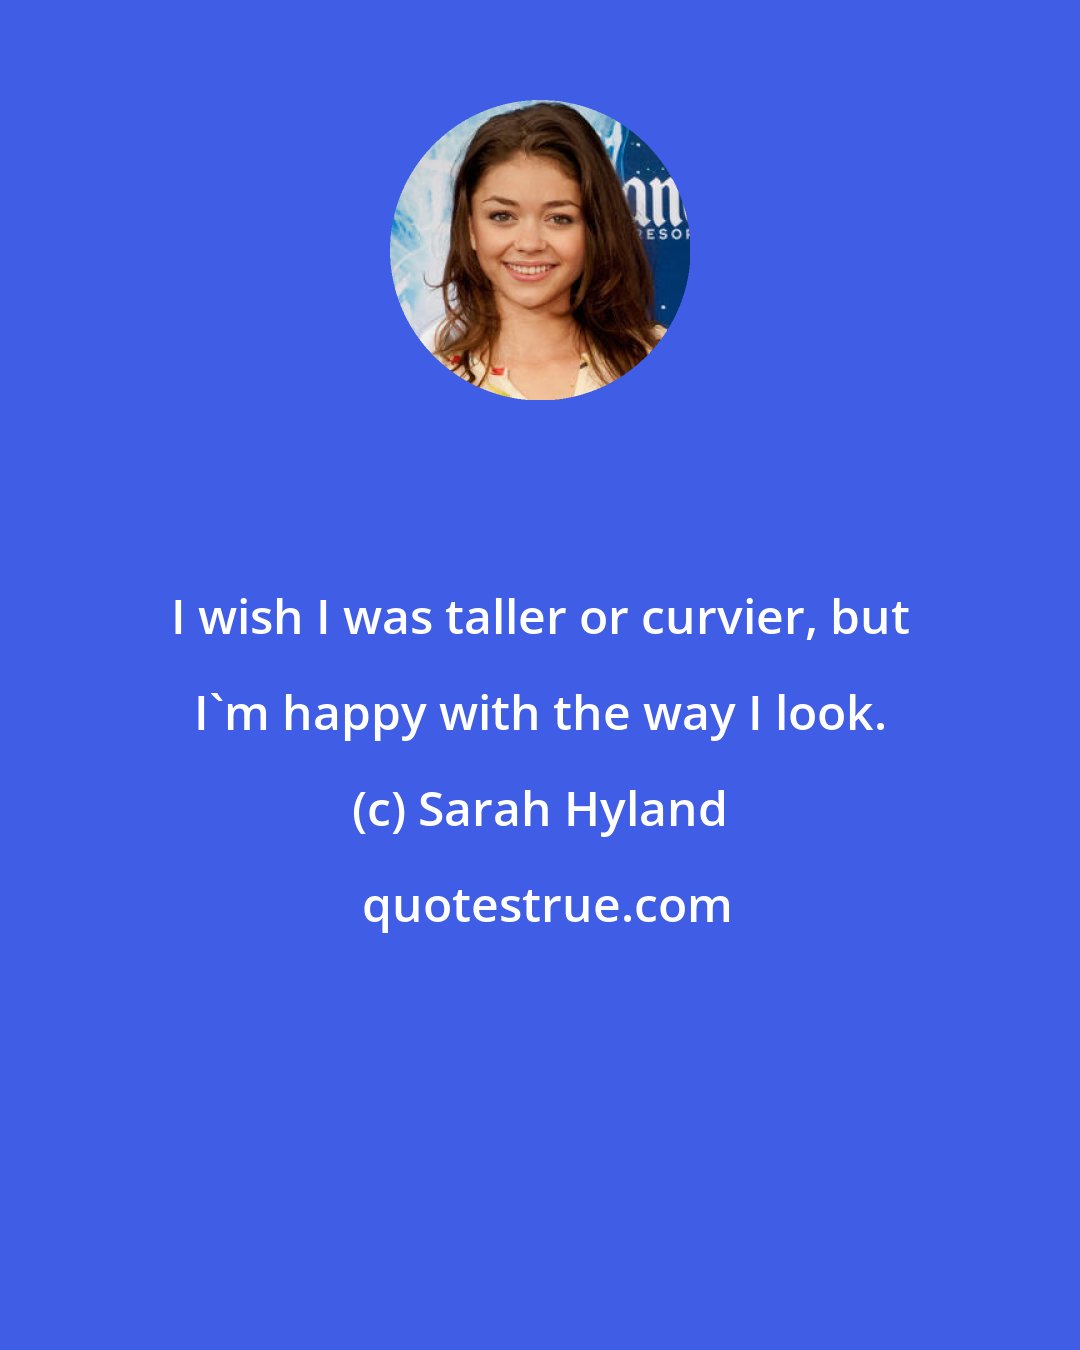 Sarah Hyland: I wish I was taller or curvier, but I'm happy with the way I look.